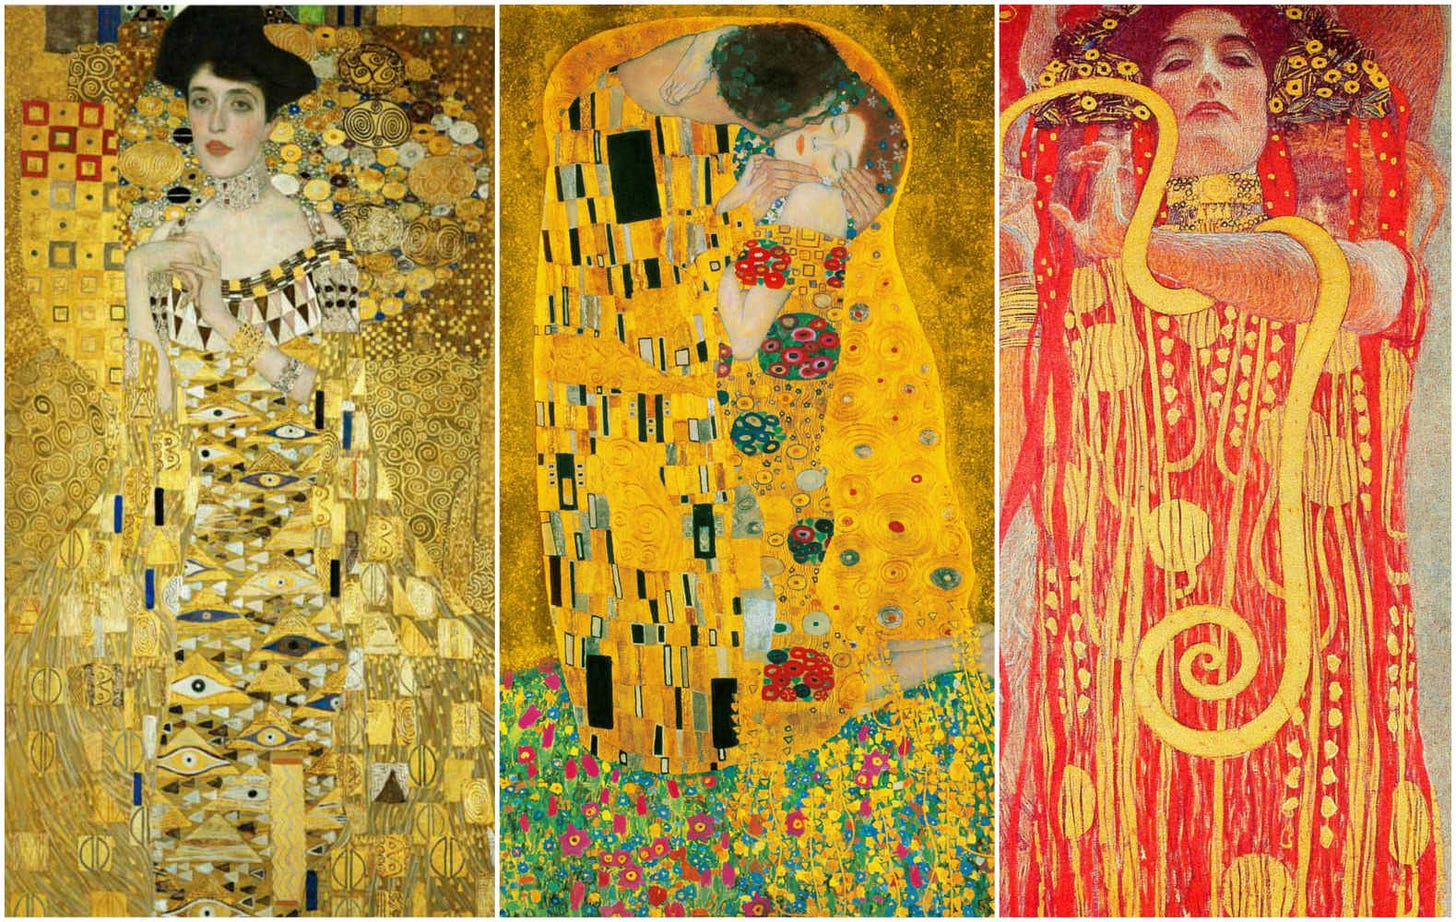 5 Facts You Didn't Know About The Golden World Of Gustav Klimt